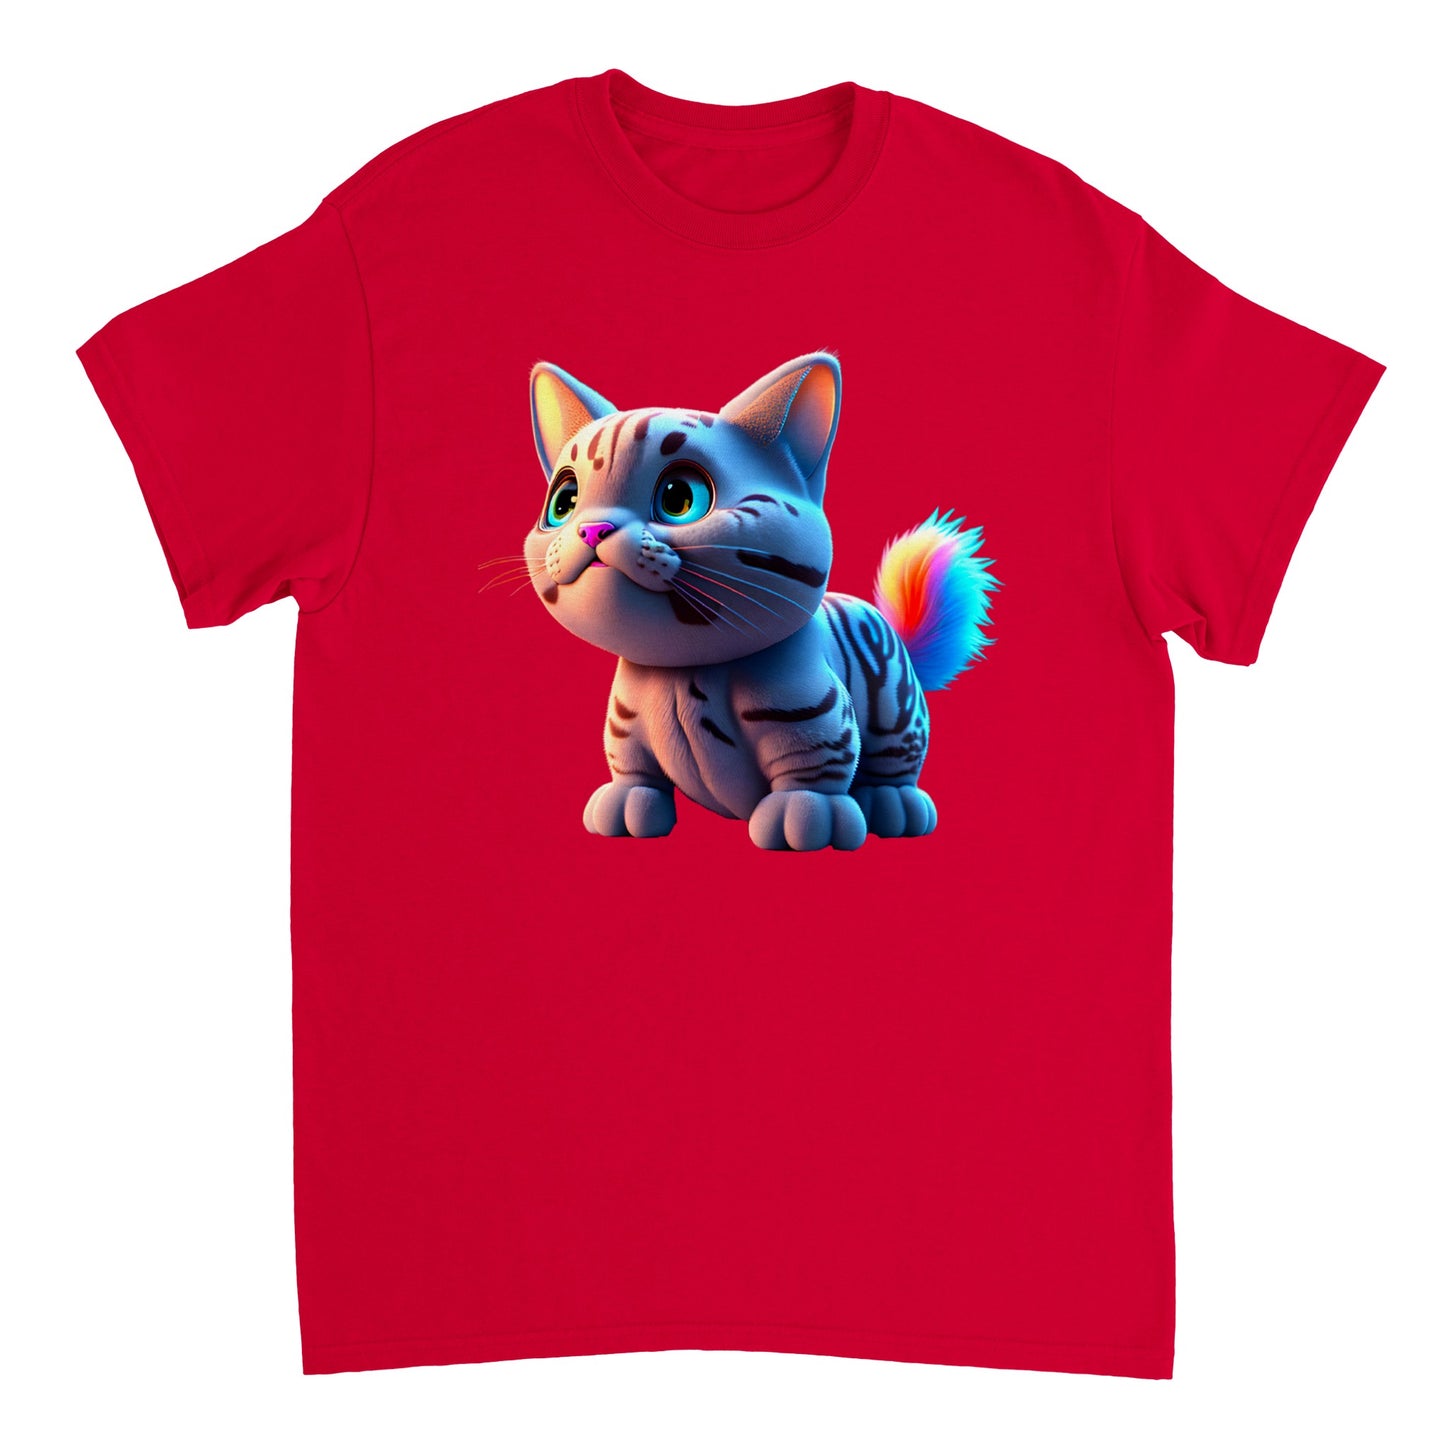 Adorable, Cool, Cute Cats and Kittens Toy - Heavyweight Unisex Crewneck T-shirt 36